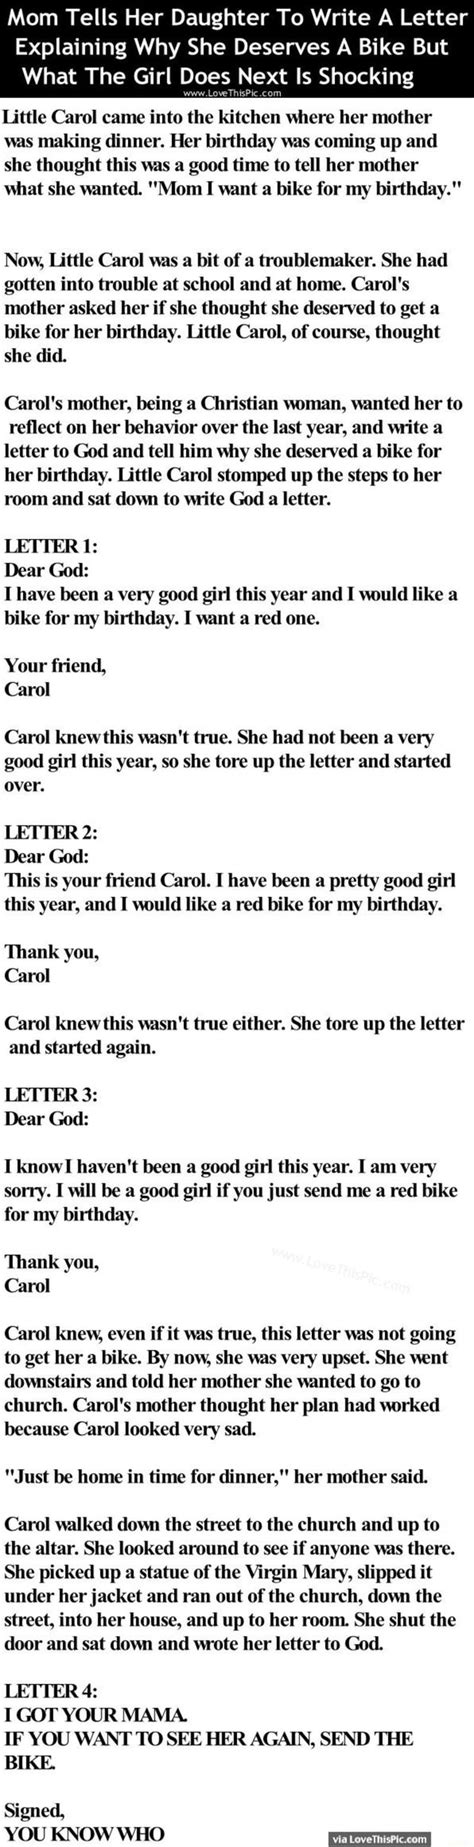 mom tells her daughter to write a letter explaining why